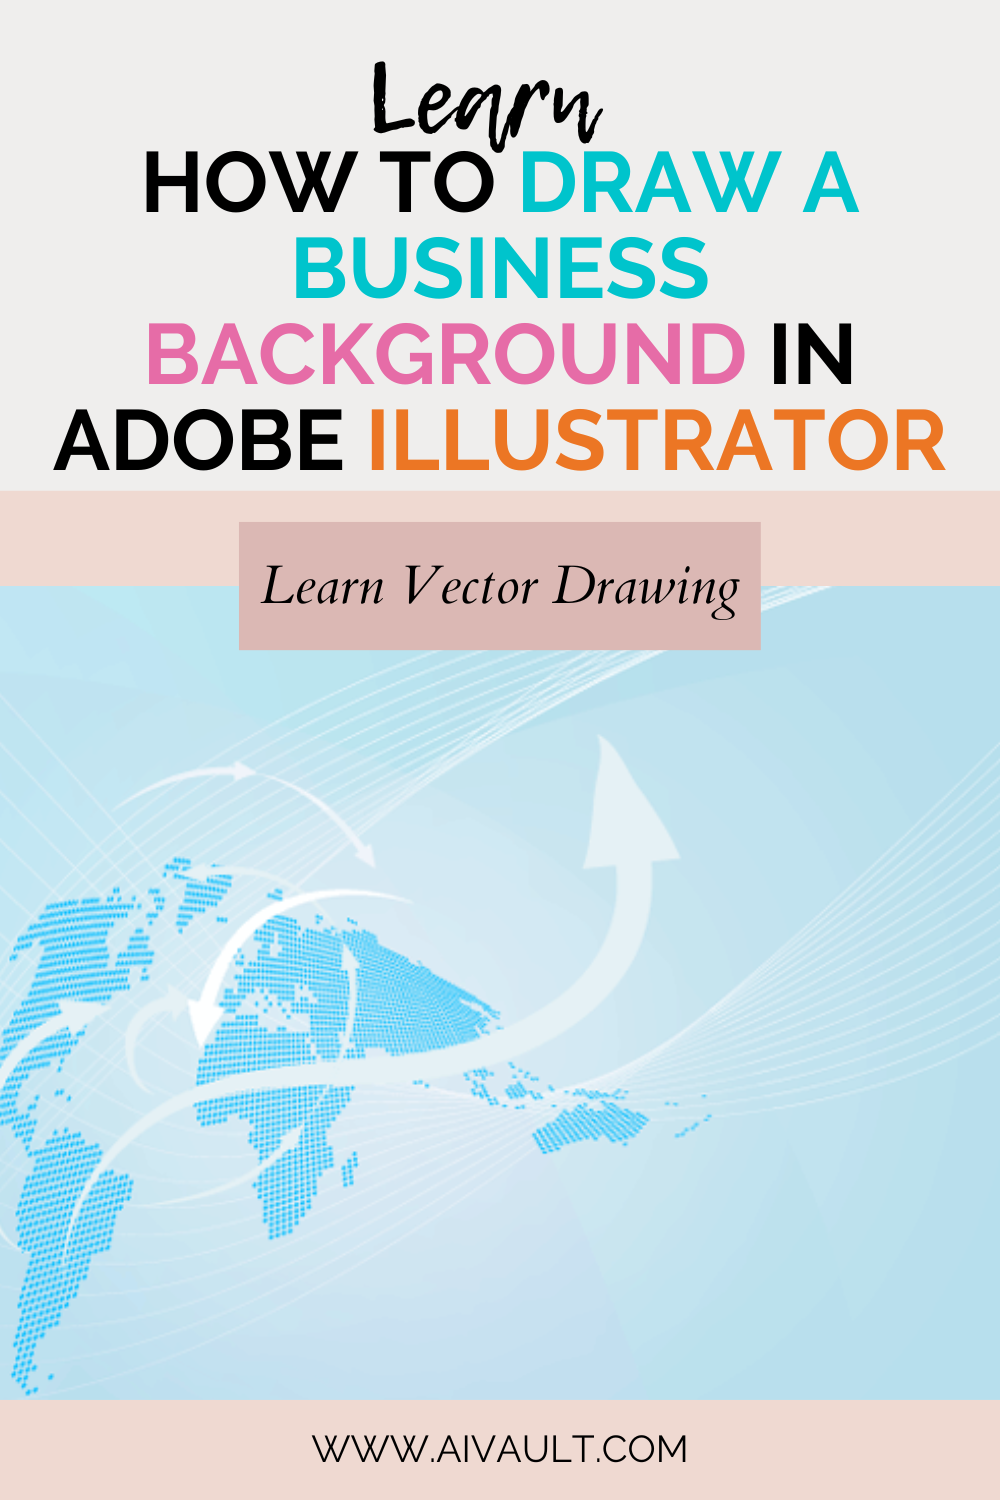 Learn how to draw a corporate background image in adobe illustrator, vector illustration using basic tools #adobeillustrator #graphicdesigner #graphicdesigntools #vectortutorial #vectortut